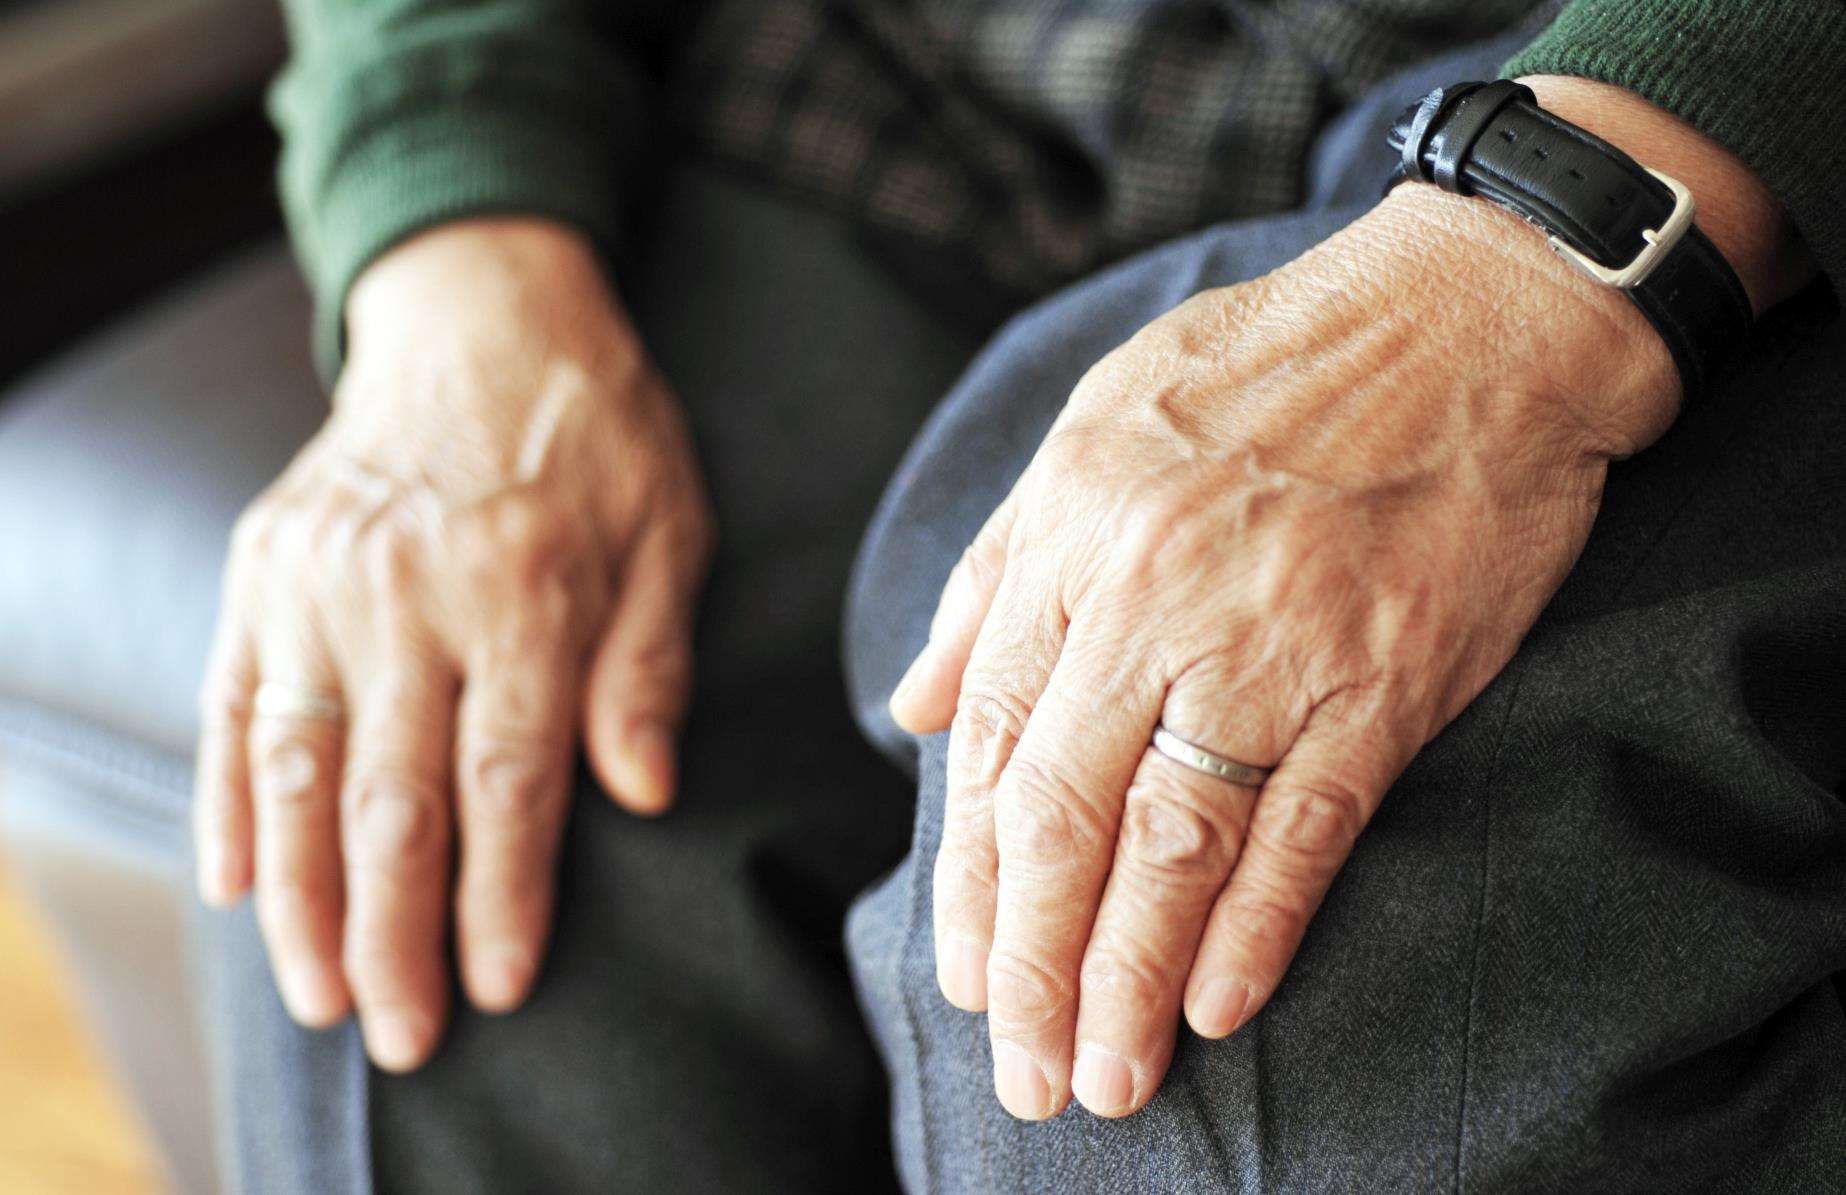 KMG USE ONLY COPYRIGHT: yang wenshuang/Getty Images/iStockphotoSUBMITTED BY: Thinkstock Image Library 0800 028 6268 or 0203 2272347Caption: Stock pictures of elderly to accompany piece on KCC failing to meet standards in care homesSlug: Elderly TNCategory: human interestContact:Thinkstock Image Library 0800 028 6268 or 0203 2272347Senior Adult FM2298000 (2902823)